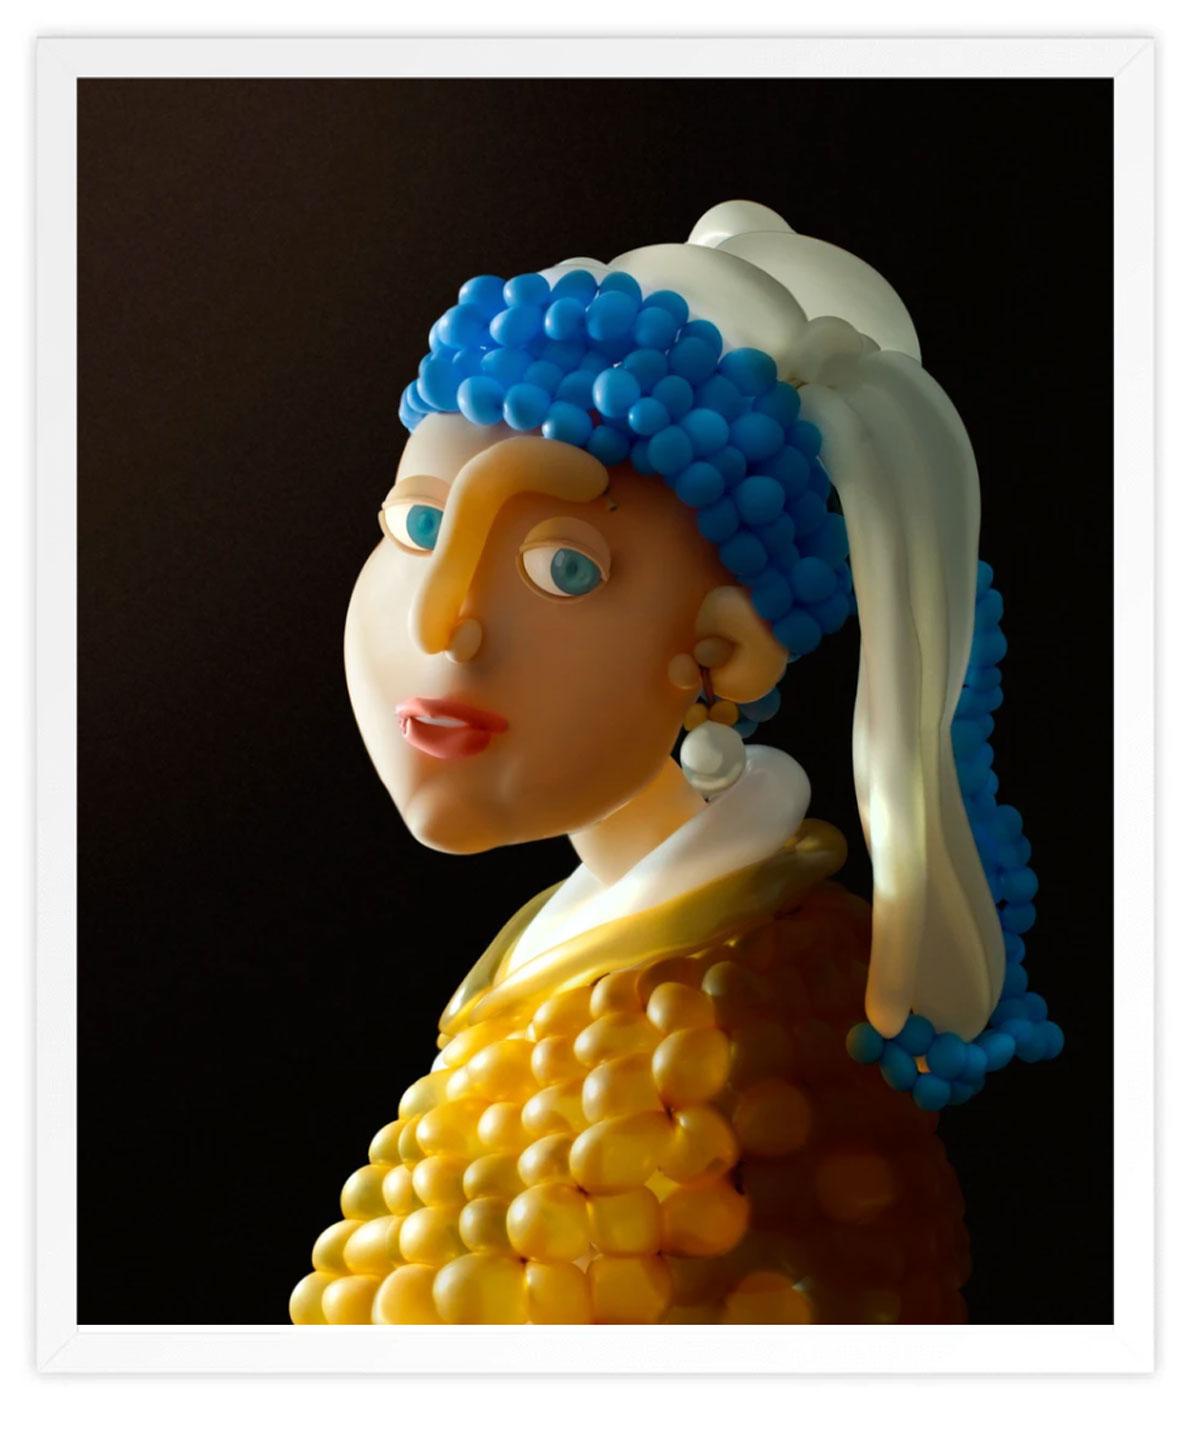 Larry Moss has created his amazing air-filled art called “airigami” in 12 countries on four continents.  Moss's work with latex balloons makes great art accessible to kids in a fun environment. Central to Moss's art is the objective that the